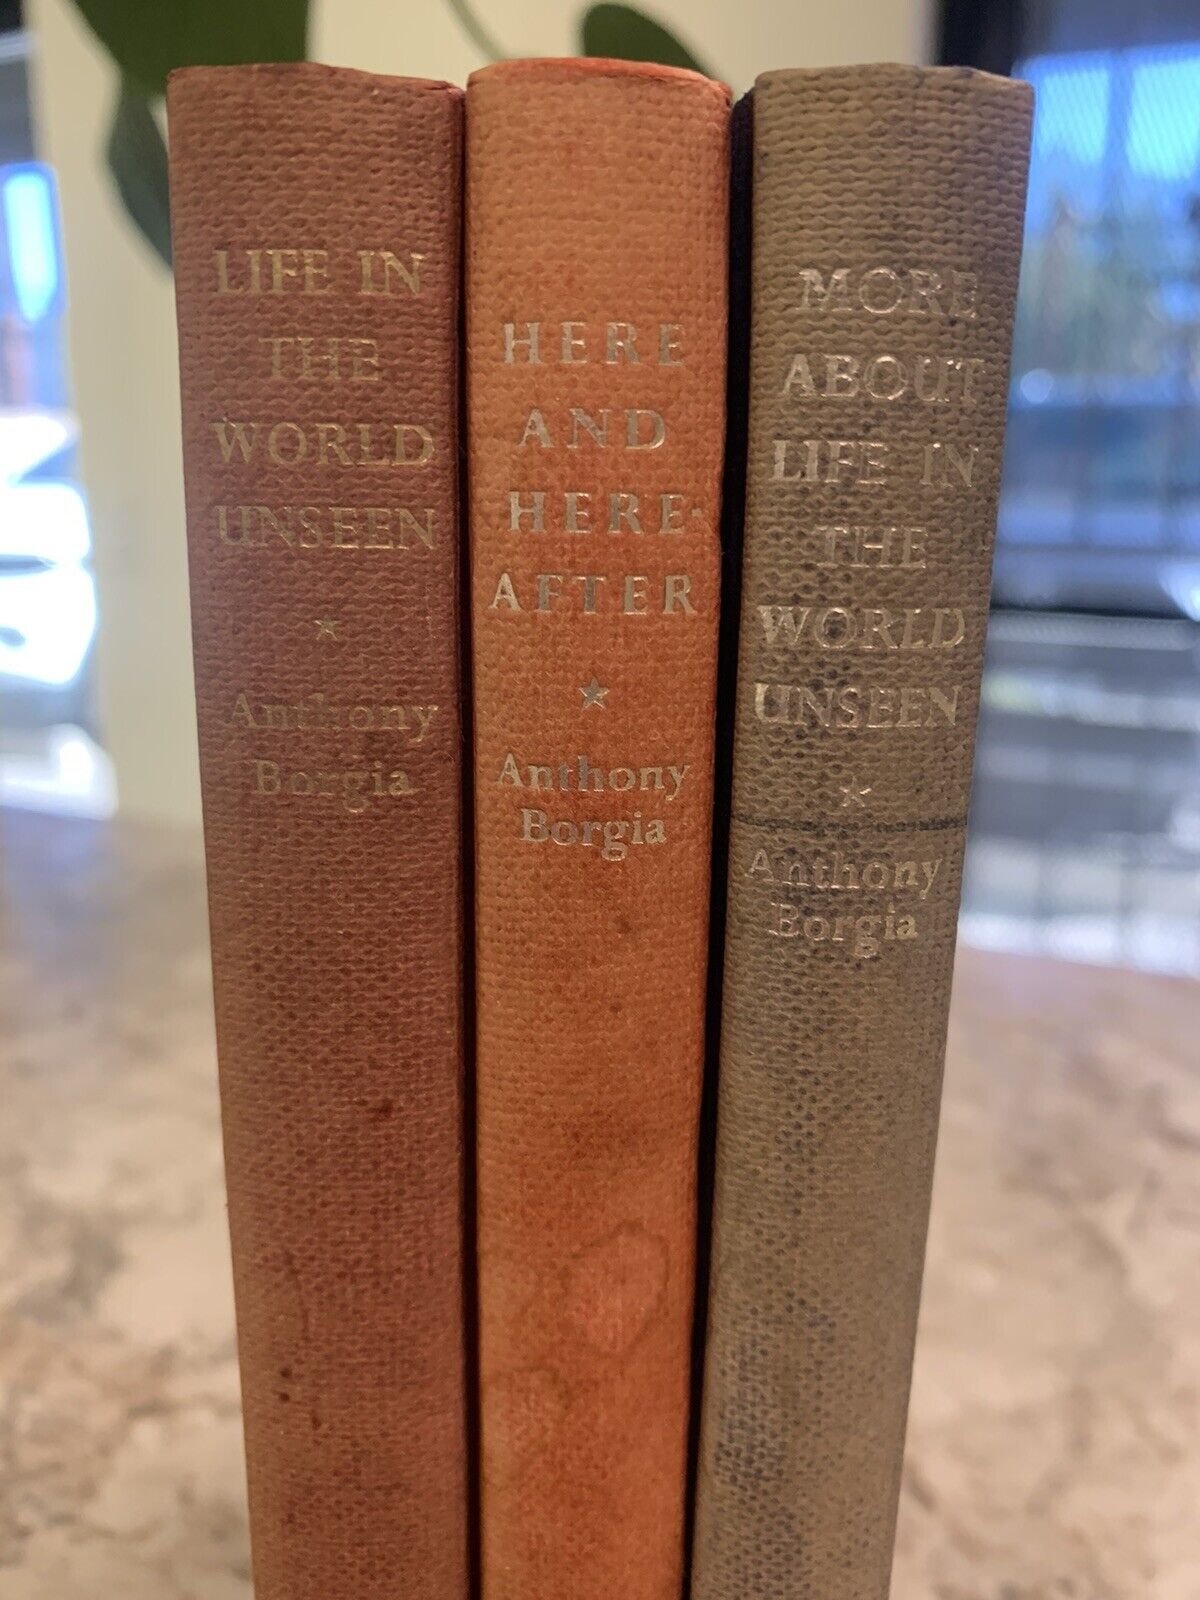 Life in the World Unseen, More About, Hereafter 3 Books by Anthony Borgia